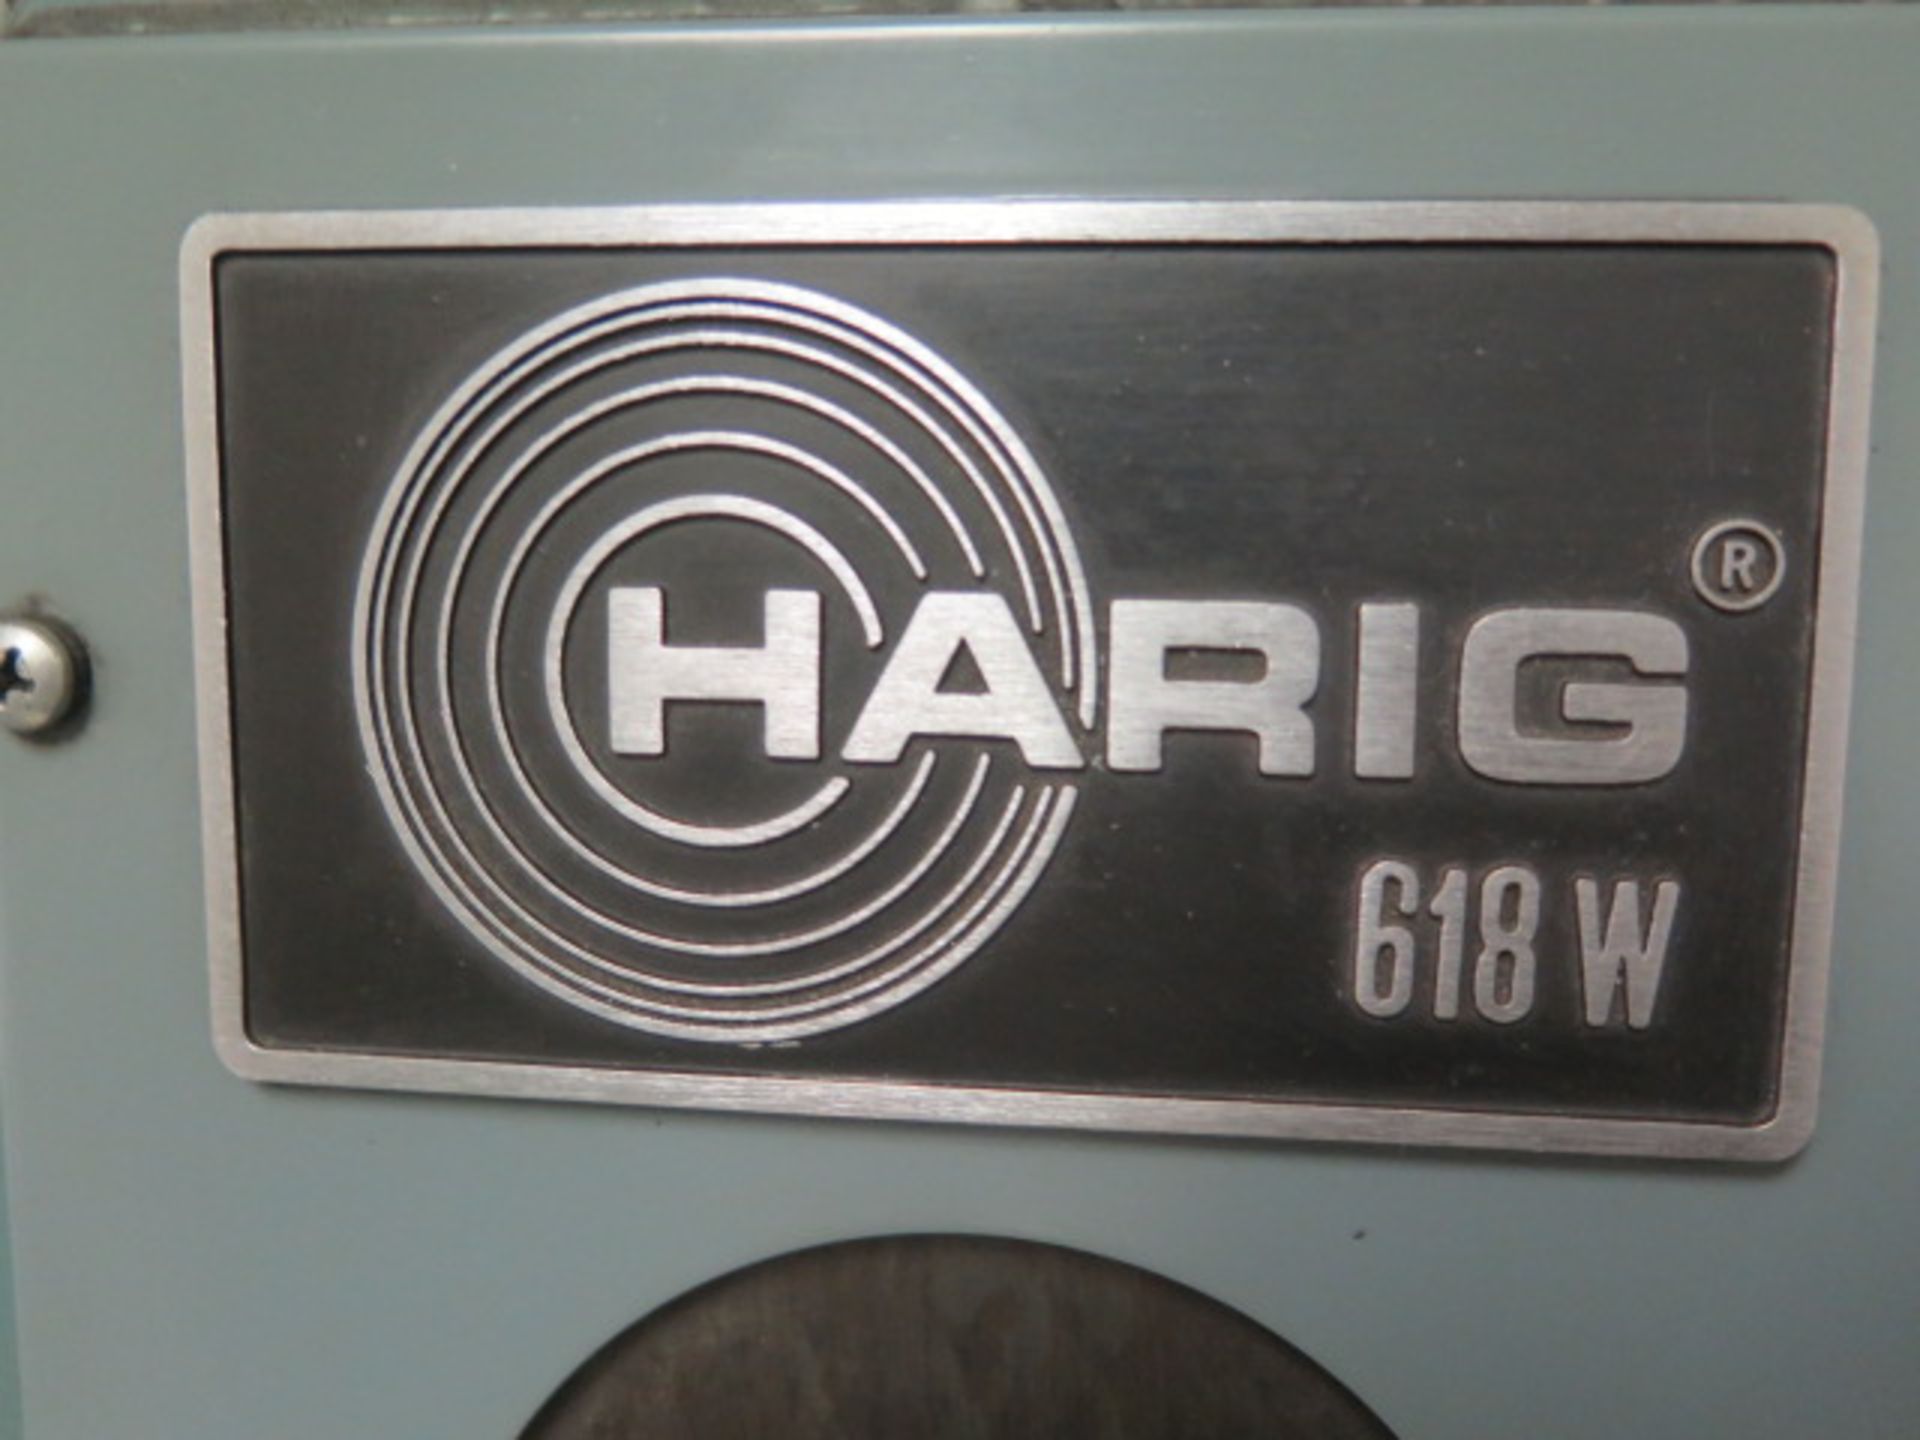 Harig mdl. 618W 6" x 18" Surface Grinder w/ Magnetic Chuck - Image 4 of 14